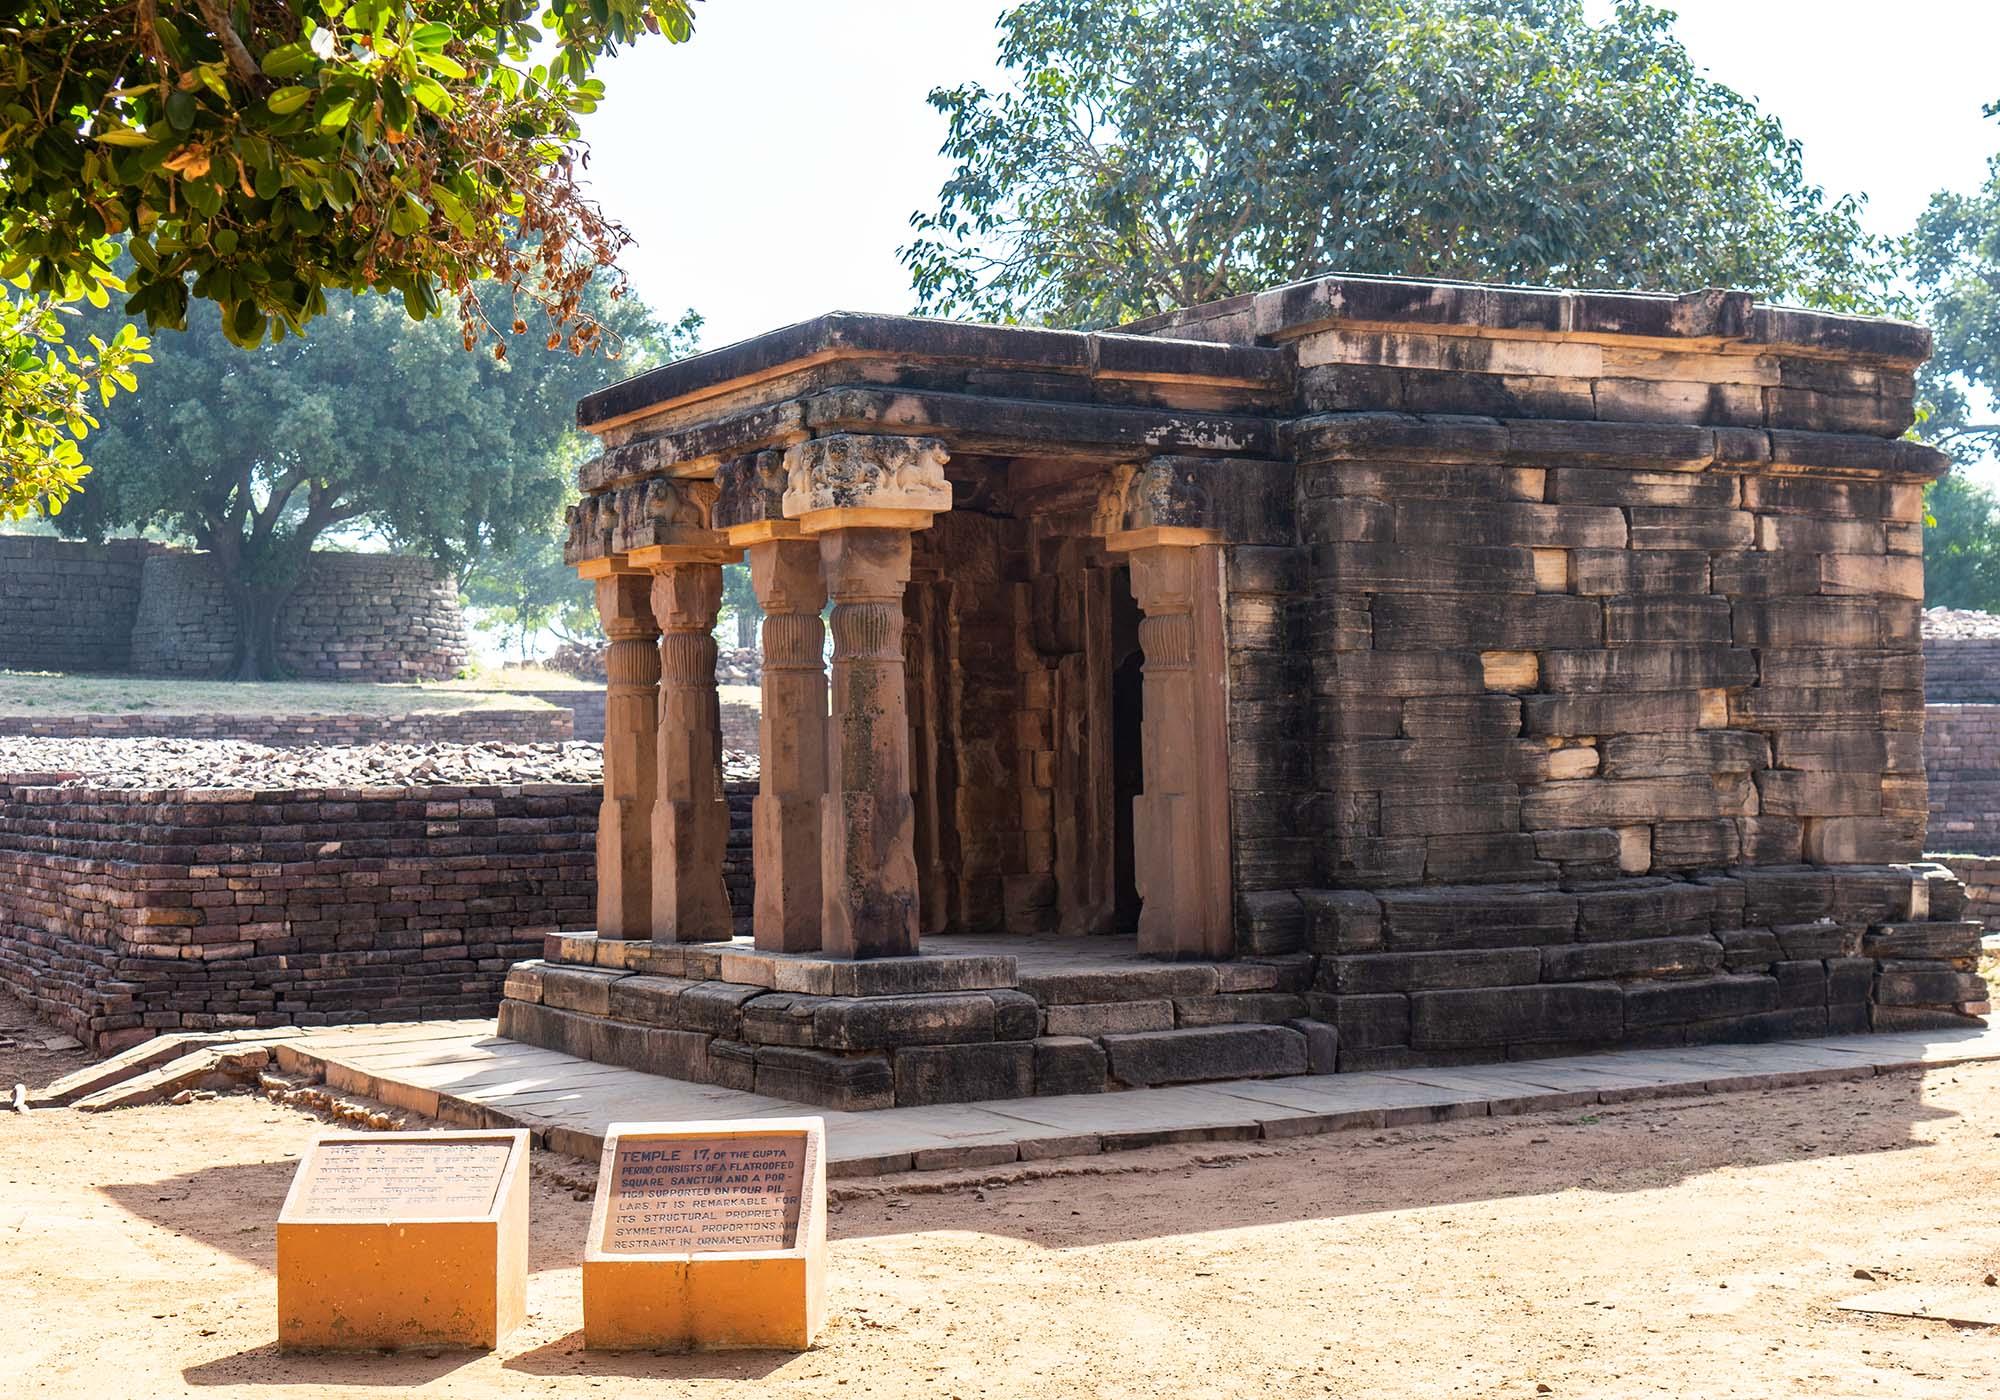 Temple 17 on the main terrace at Sanchi consists of a flat-roofed square sanctum with a portico supported on four pillars in the front. – © Michael Turtle